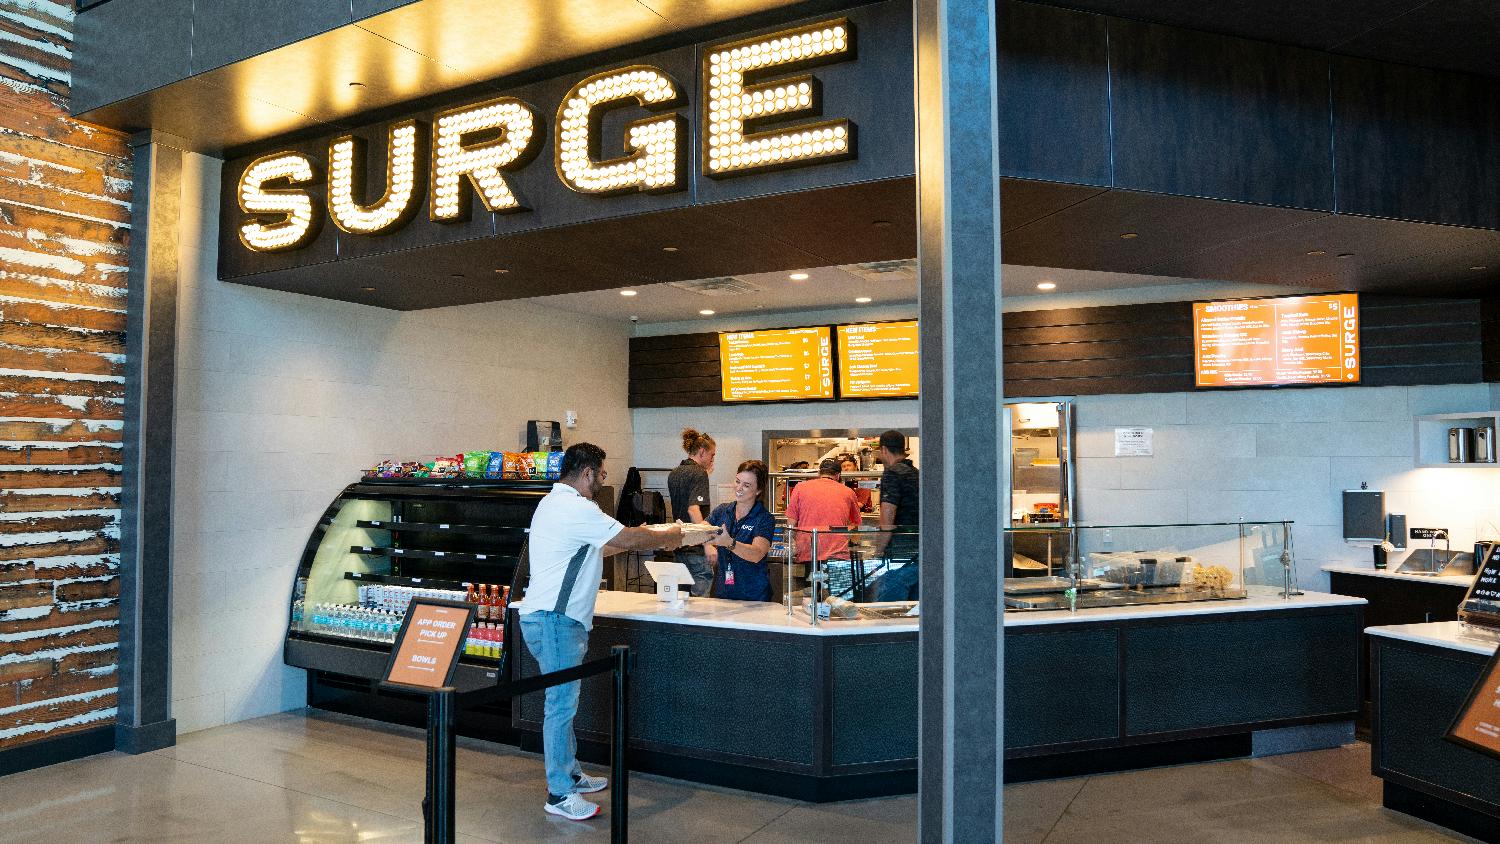 The SURGE, Power Design's on-campus café, provides convenient breakfast, lunch, and dinner options (plus a coffee bar)!